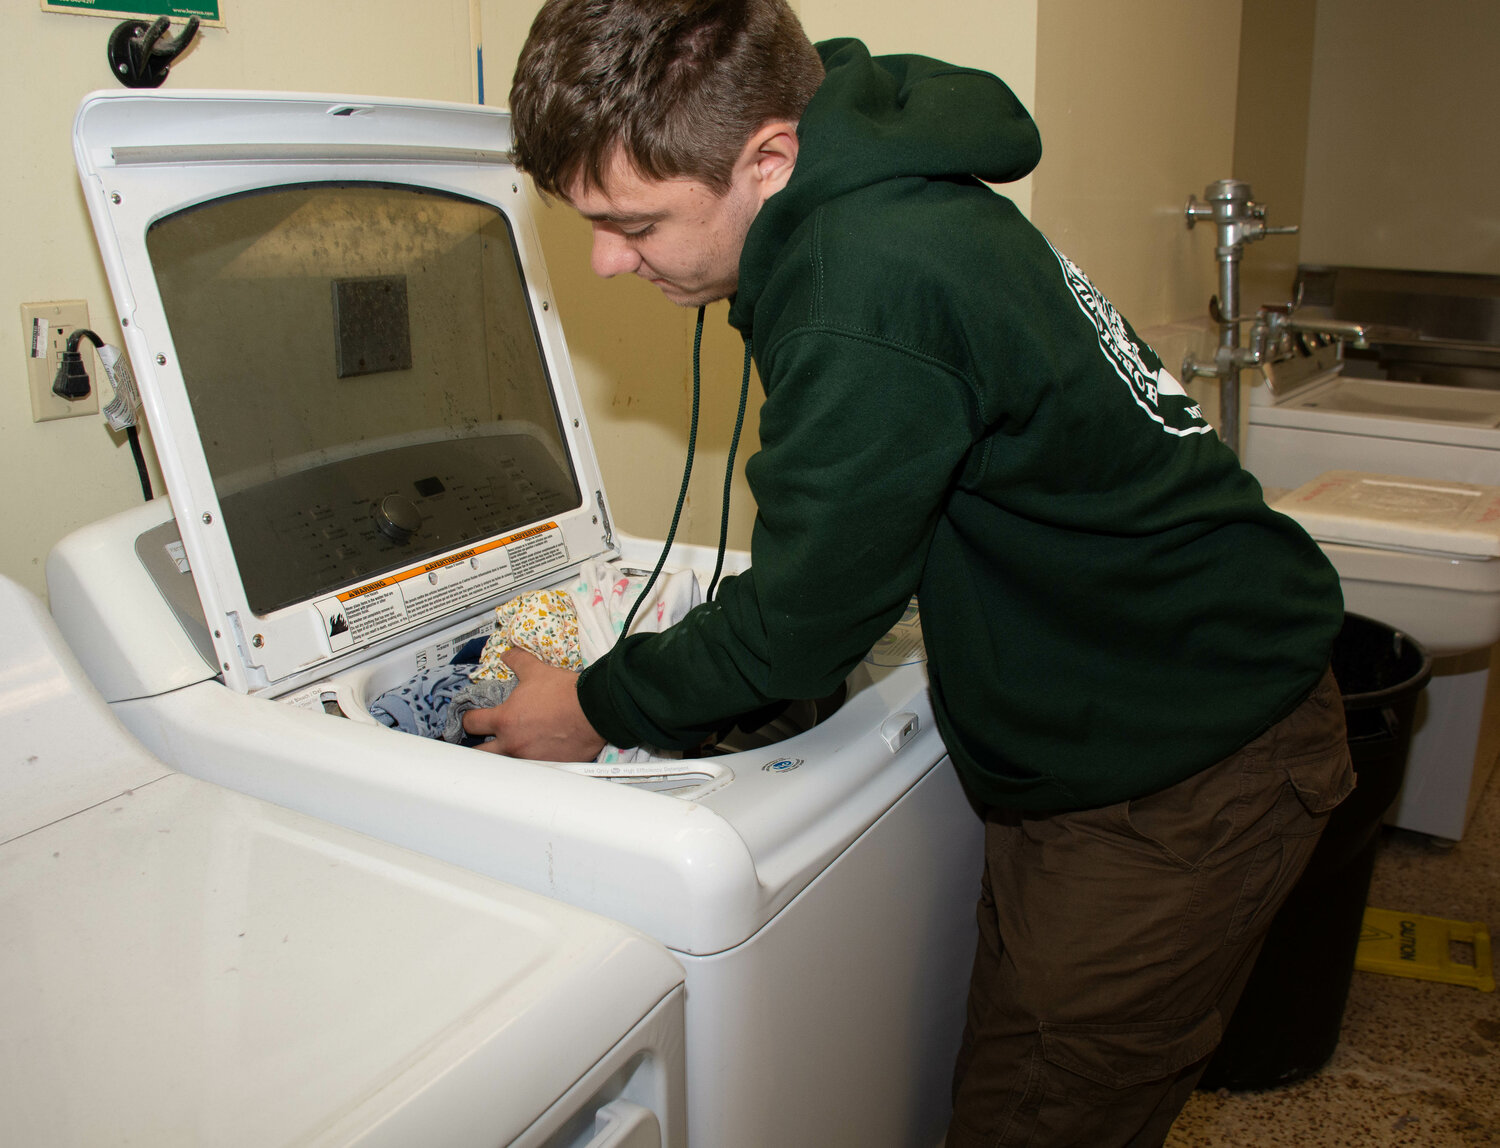 Volunteer Jacob Schroeder of the New Hope-Solebury Bridge Program does some laundry at The Baby Bureau’s site in Warminster.